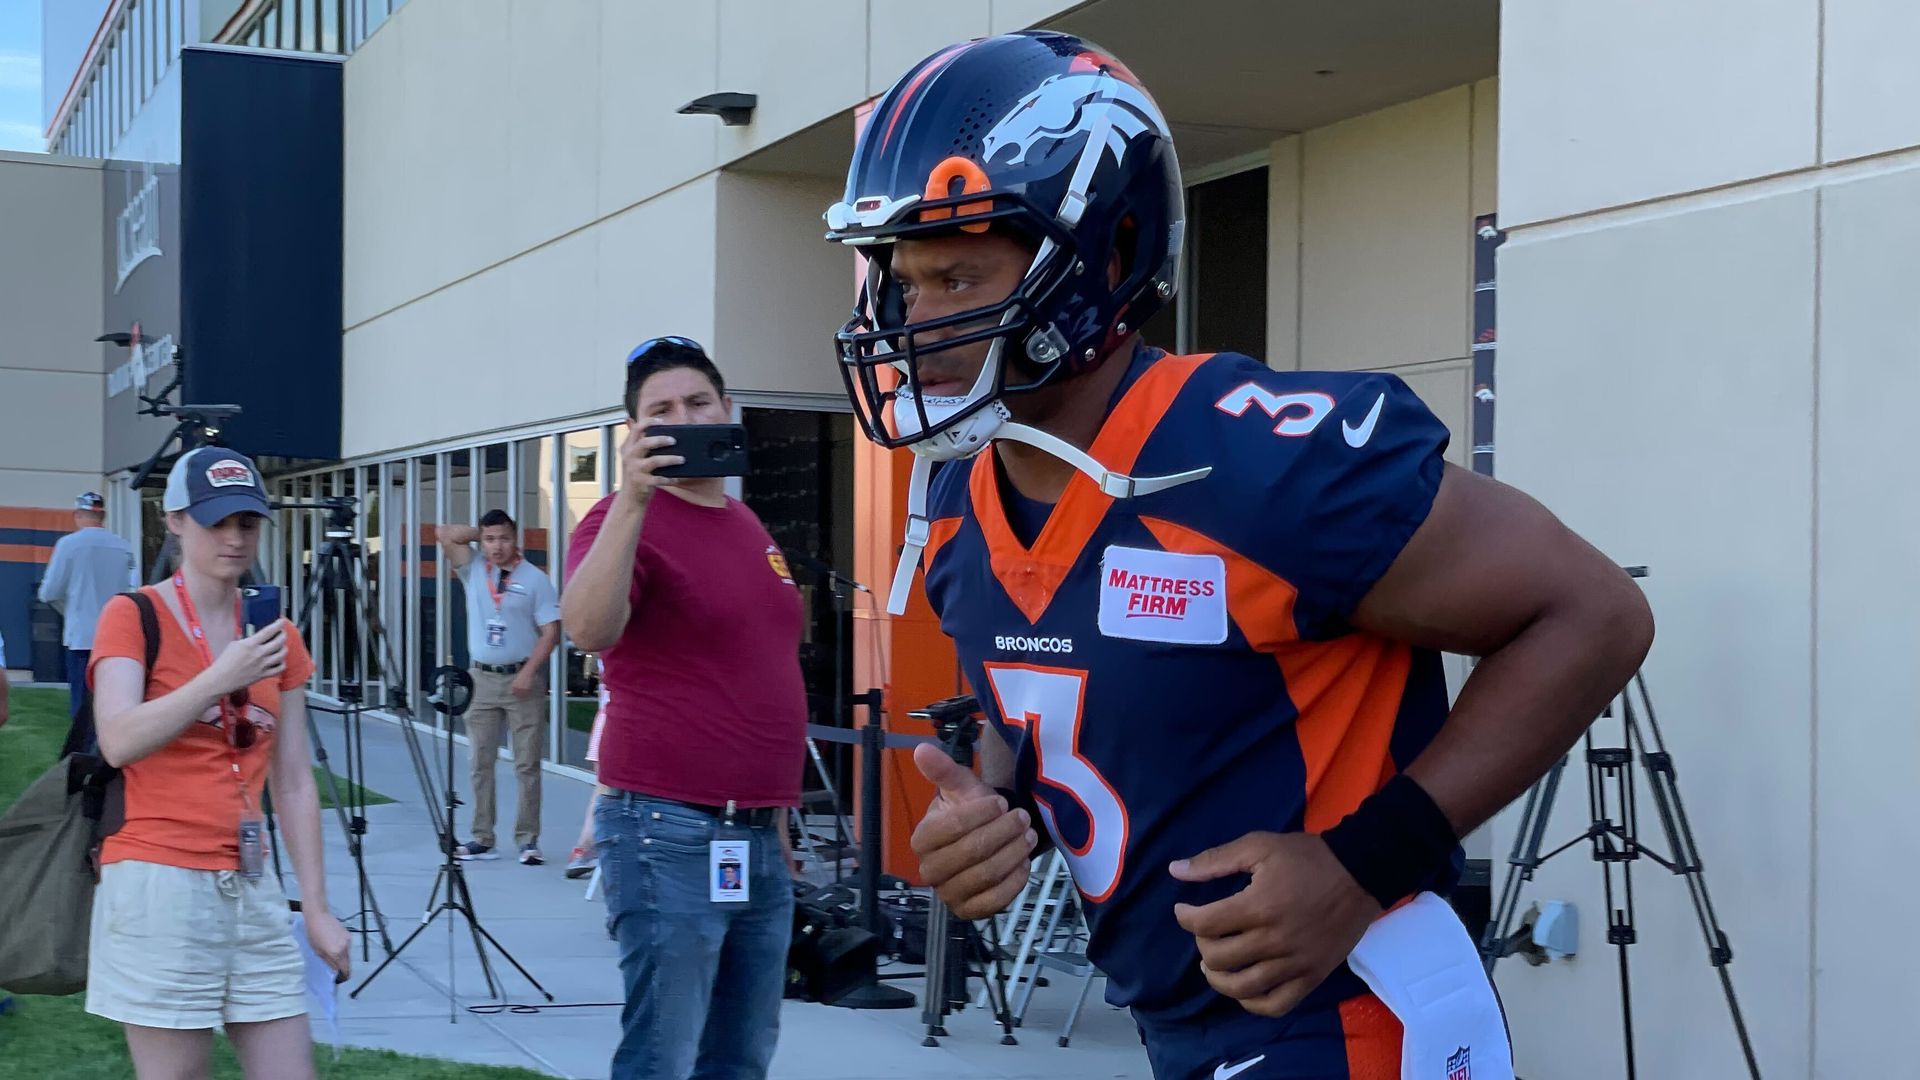 A man in an navy blue American football uniform with orange lines runs past people taking photographs.m 